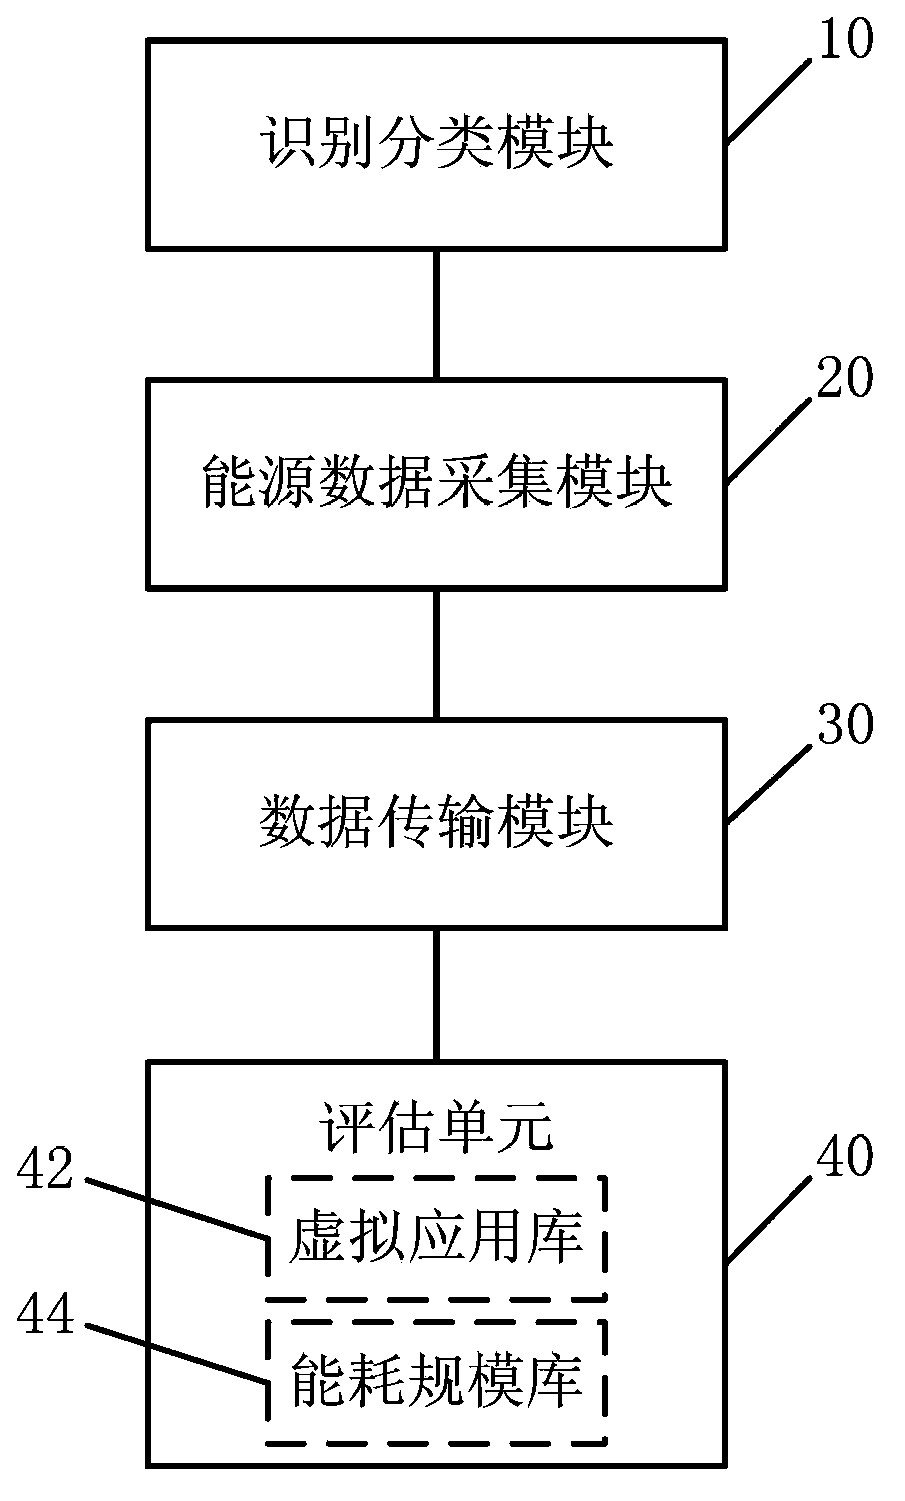 Energy assessment system and method